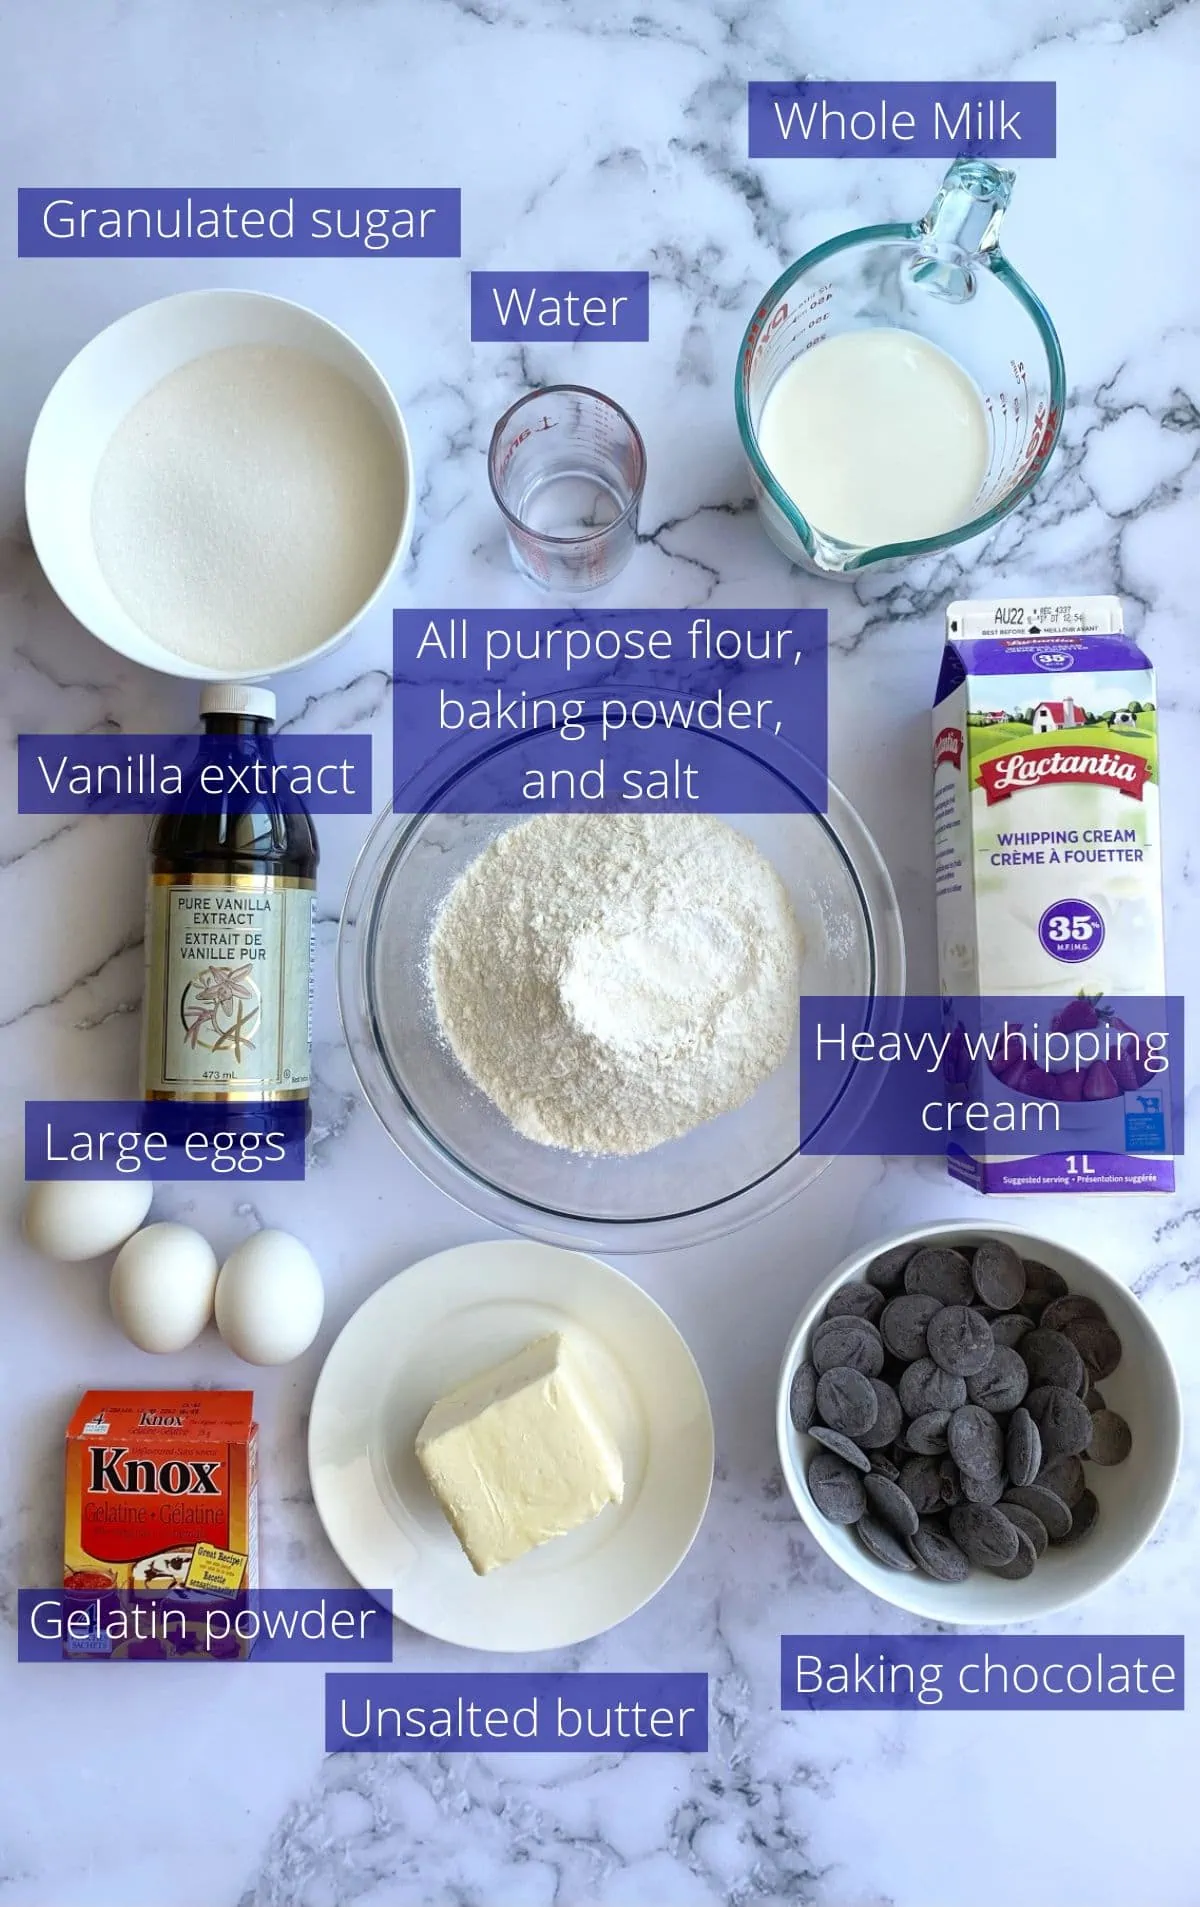 Ingredients needed to make this cake.